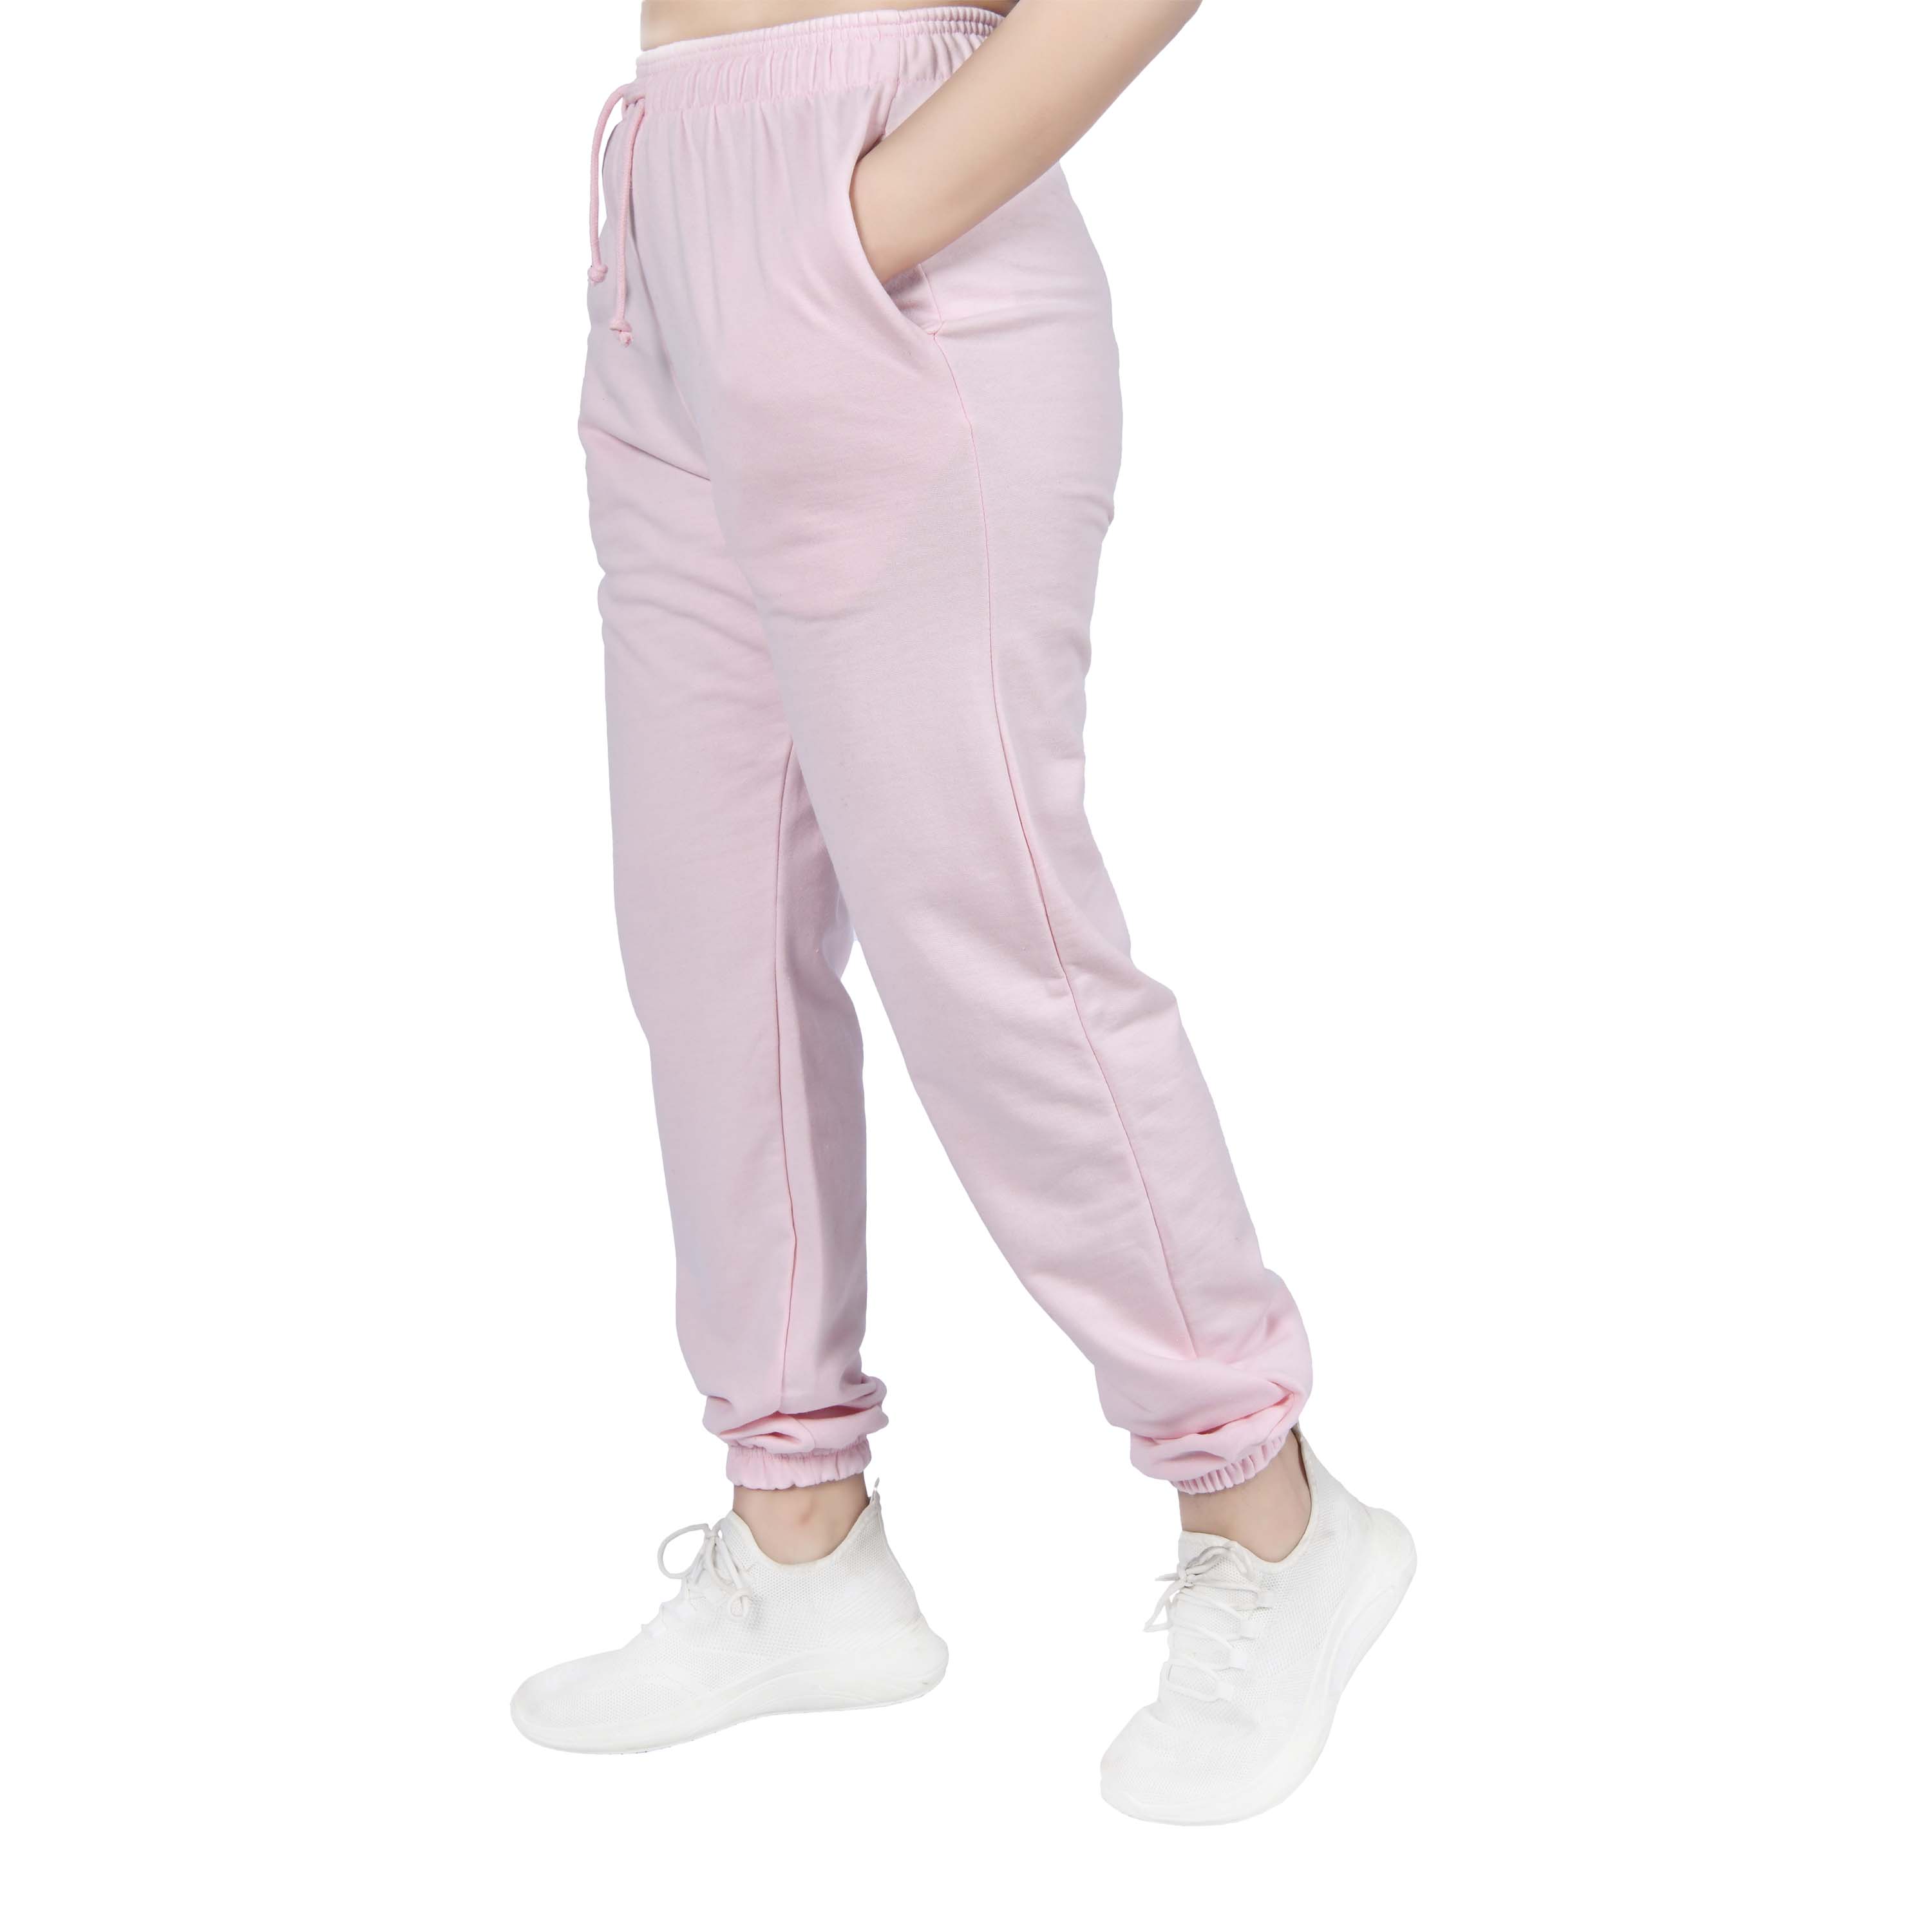 Joggers for Women-Pink